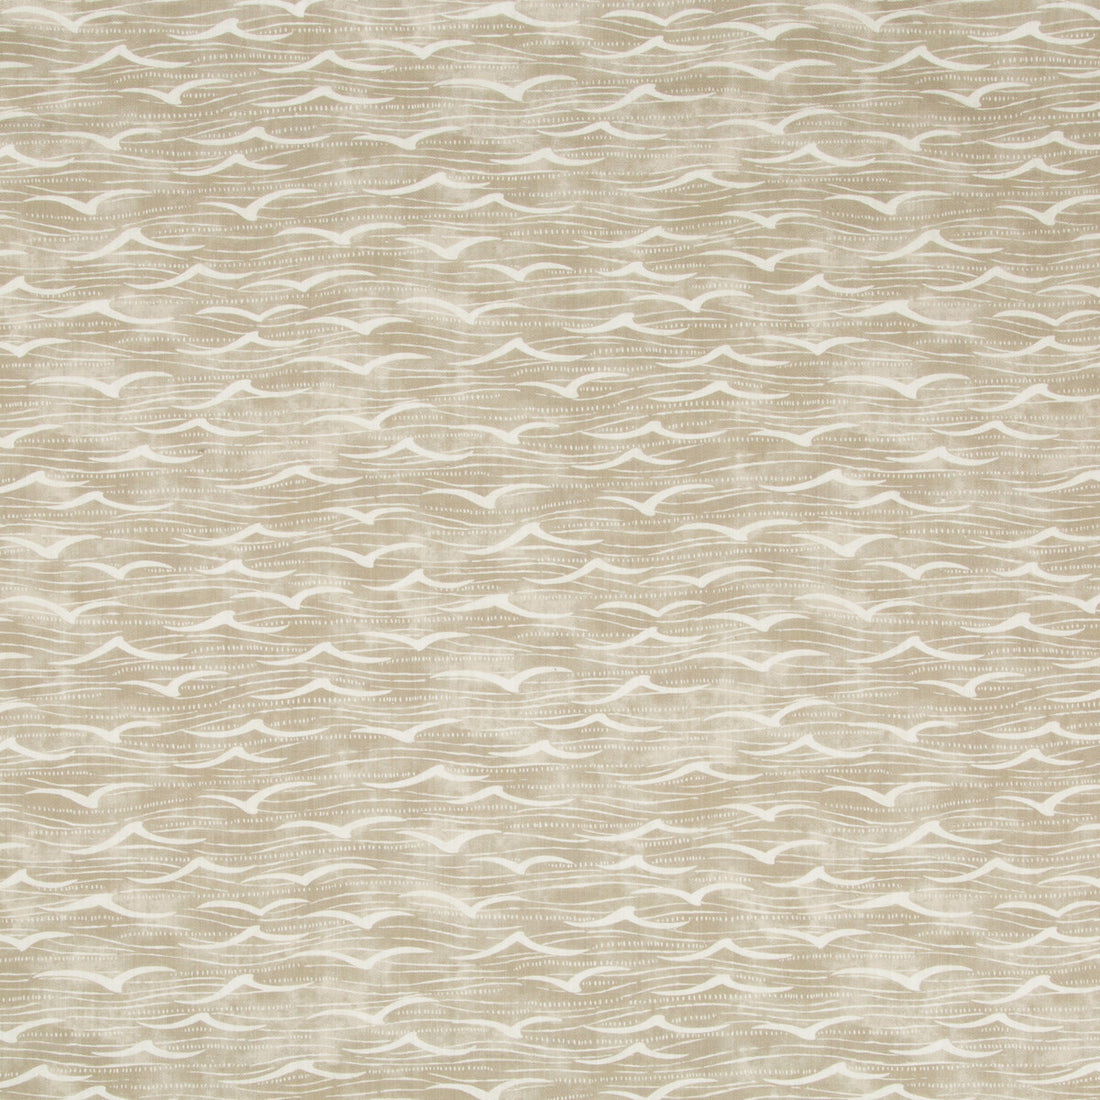 Angelus fabric in sand color - pattern ANGELUS.16.0 - by Kravet Basics in the Jeffrey Alan Marks Oceanview collection